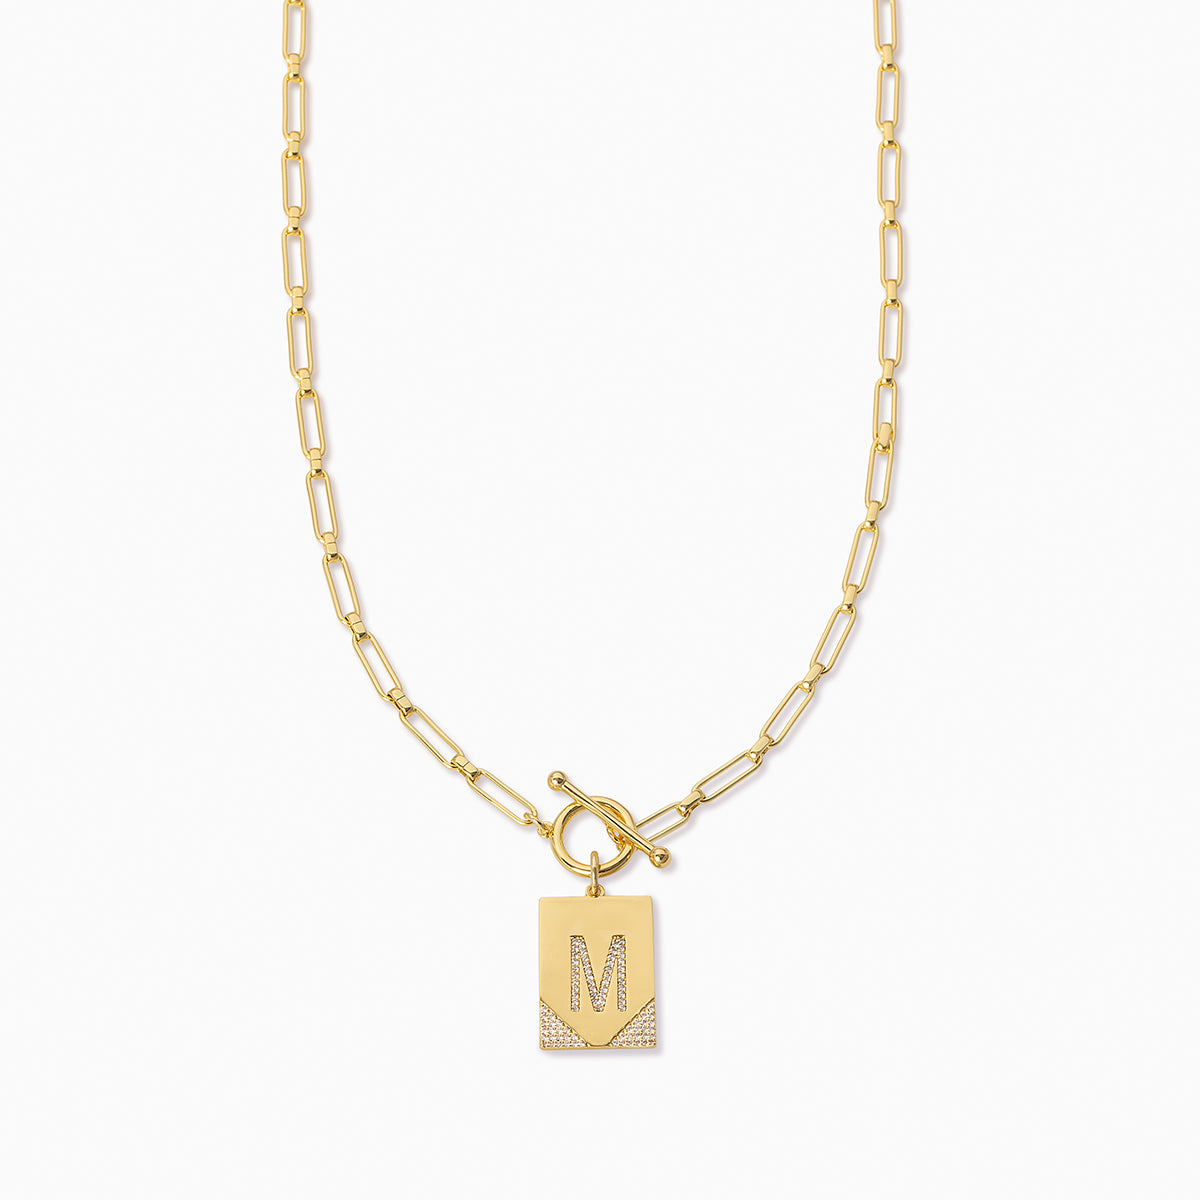 Leave Your Mark Chain Necklace | Gold  M | Product Image | Uncommon James